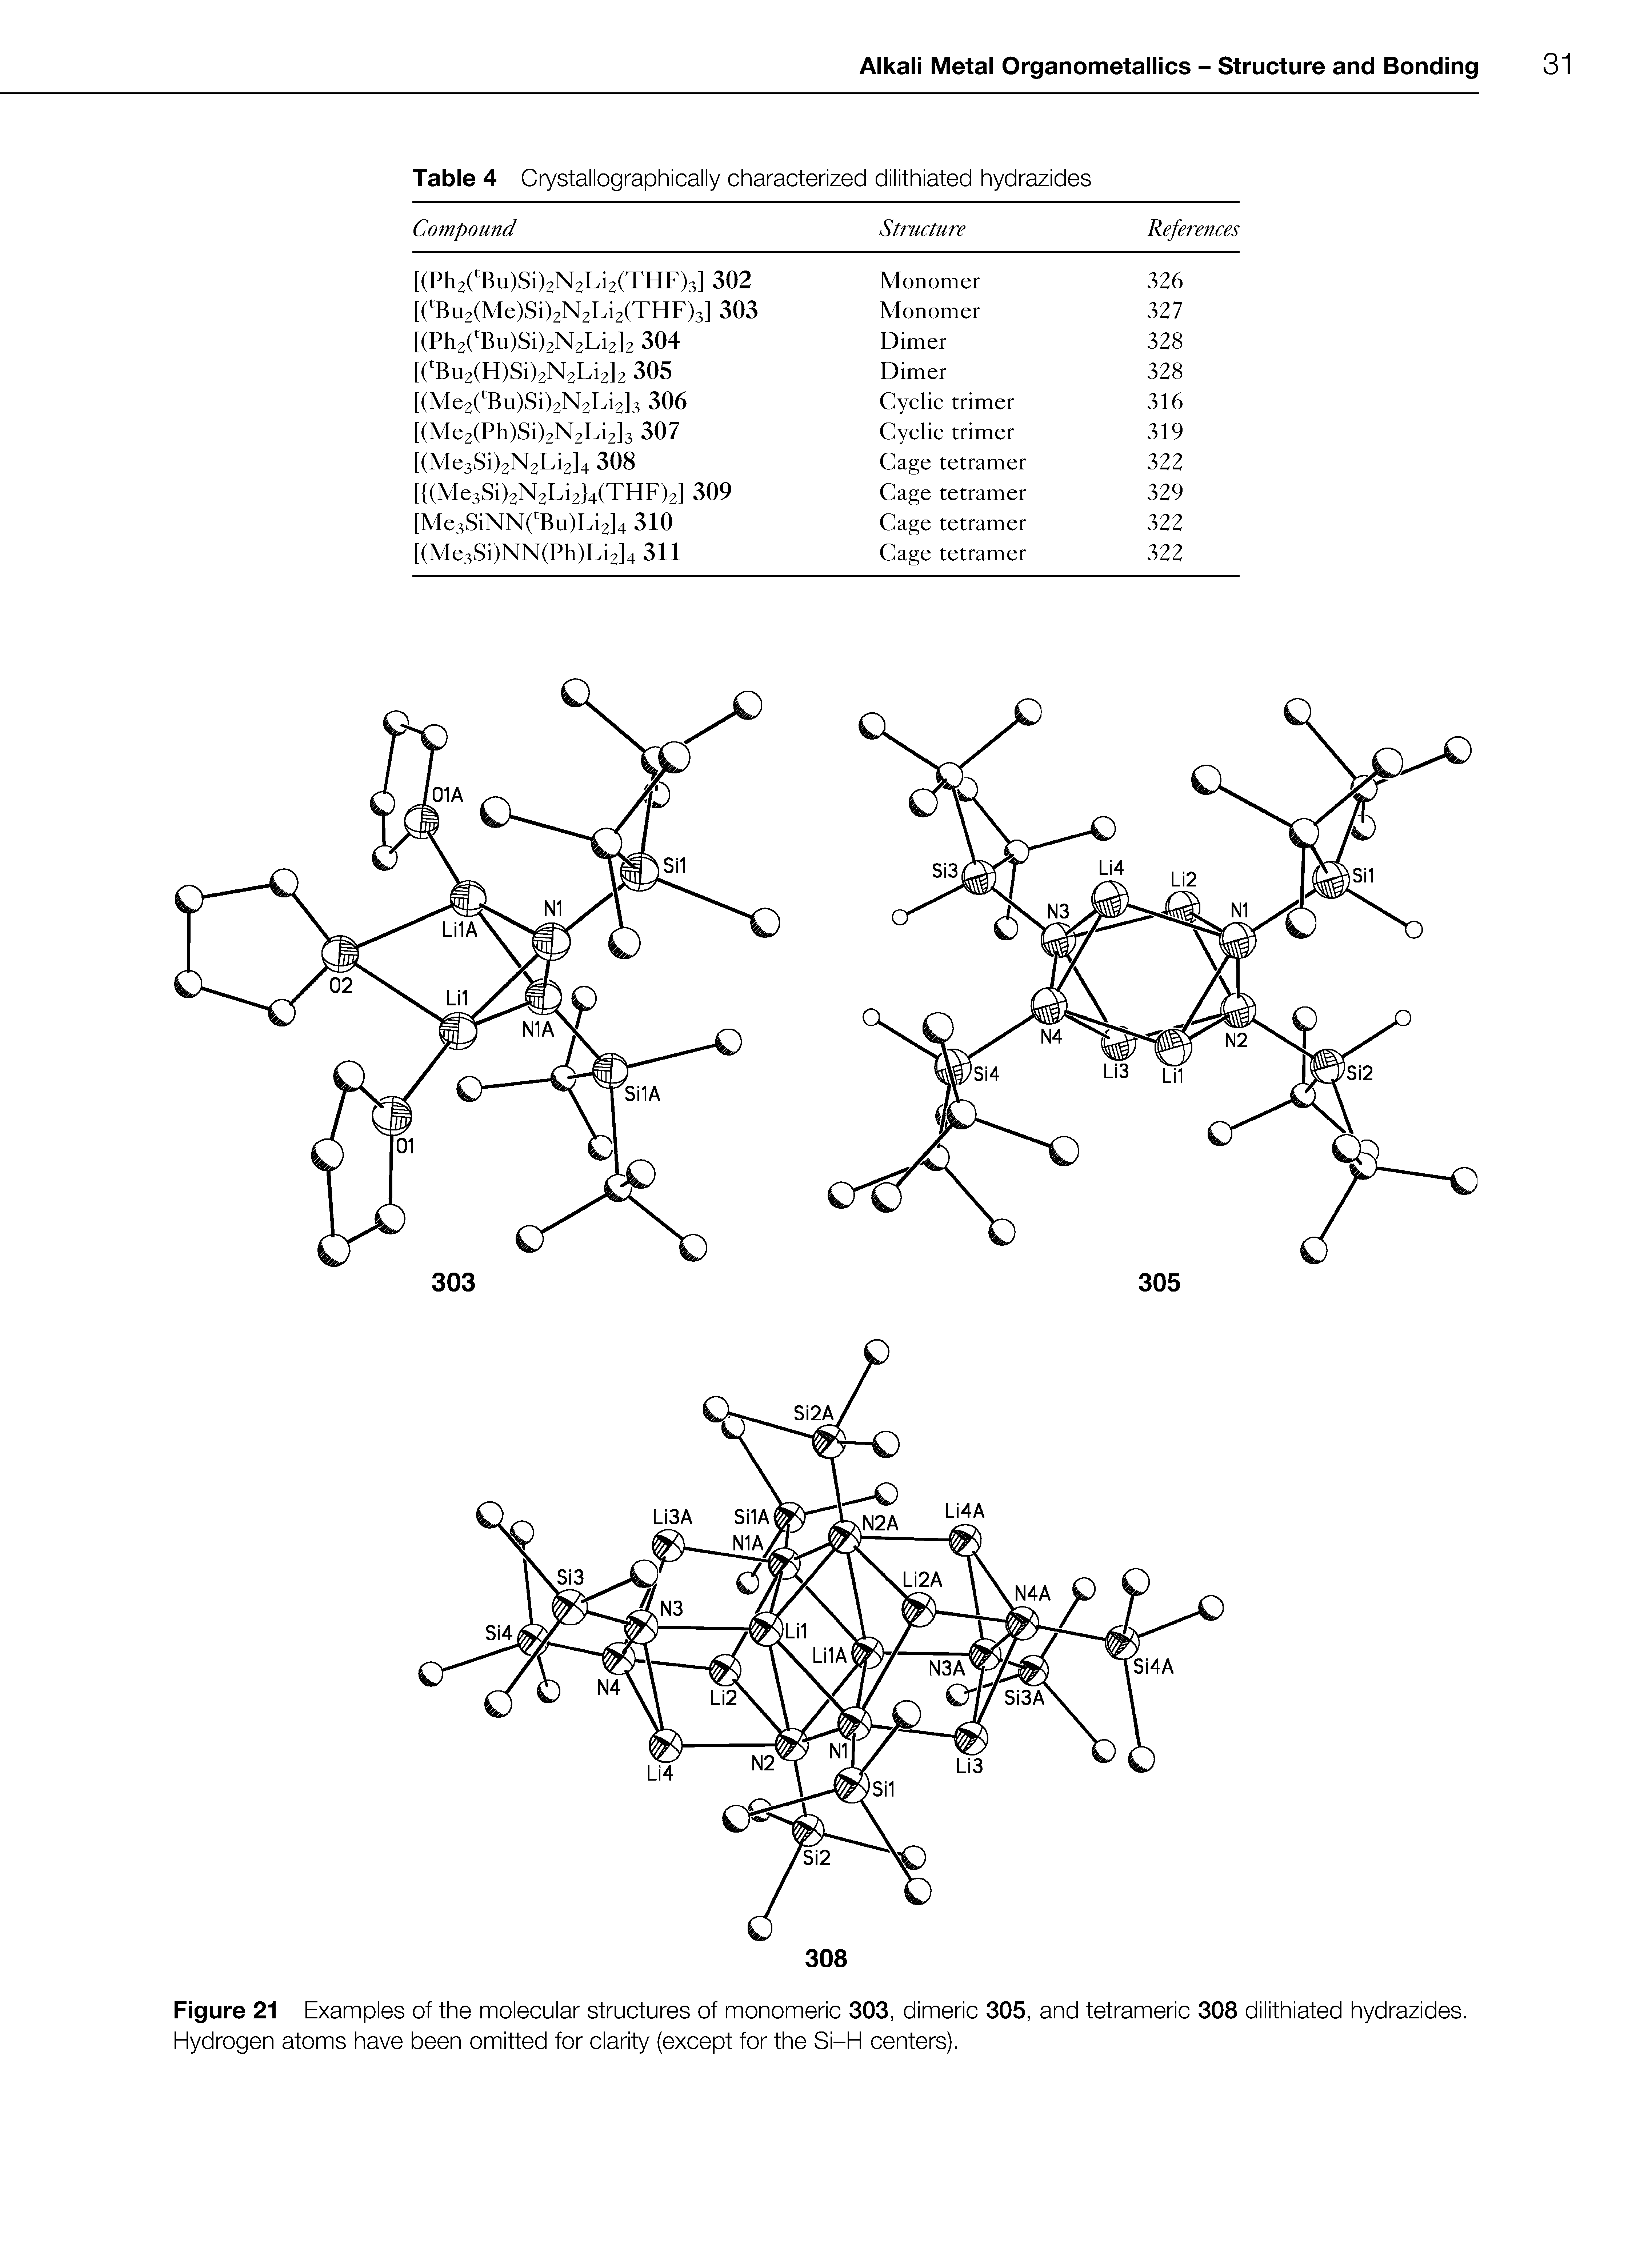 Figure 21 Examples of the molecular structures of monomeric 303, dimeric 305, and tetrameric 308 dilithiated hydrazides. Hydrogen atoms have been omitted for clarity (except for the Si-H centers).